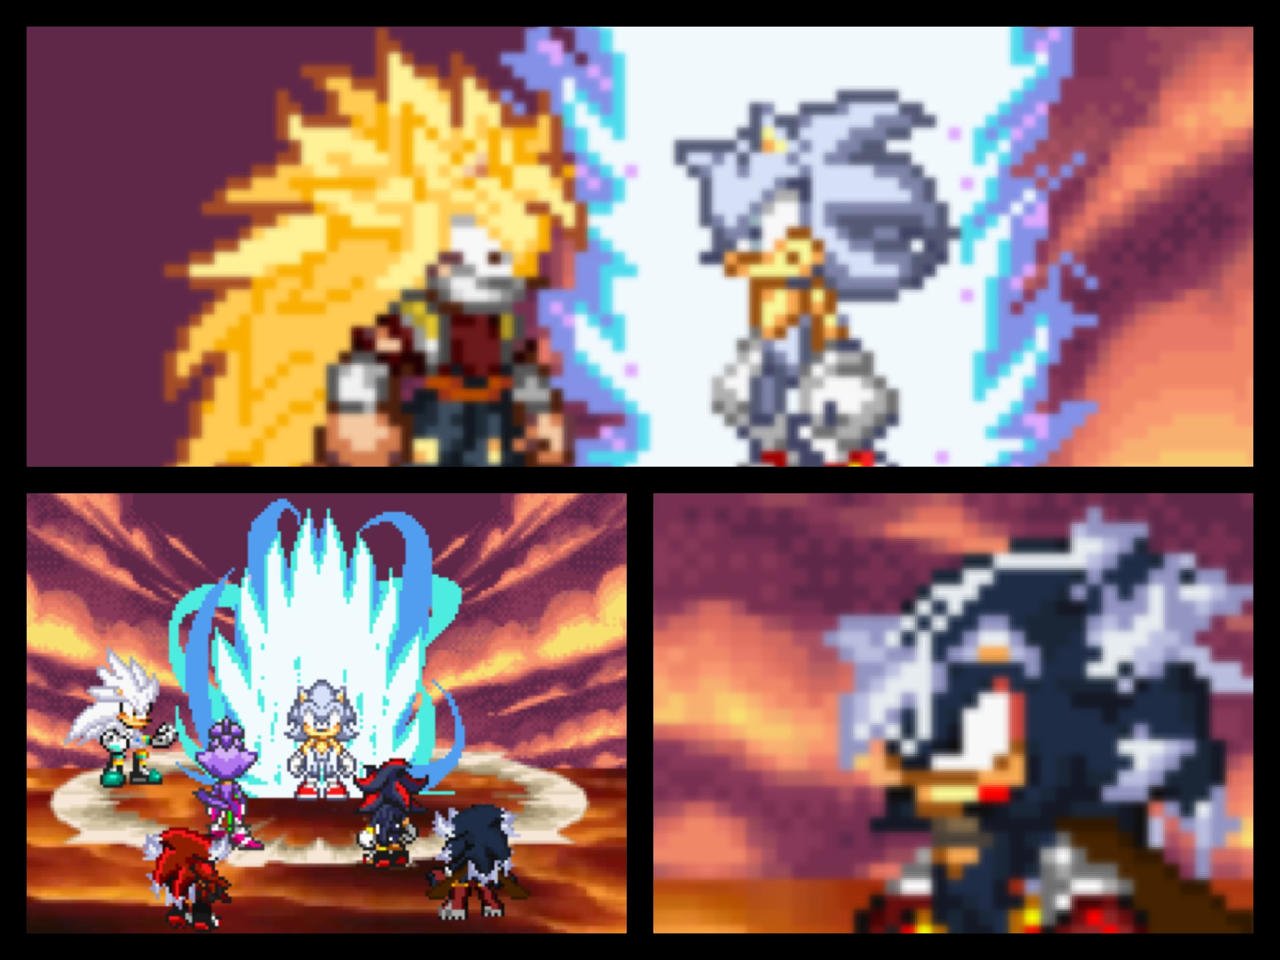 If ultra beast were in sword and shield by sonic44422 on DeviantArt